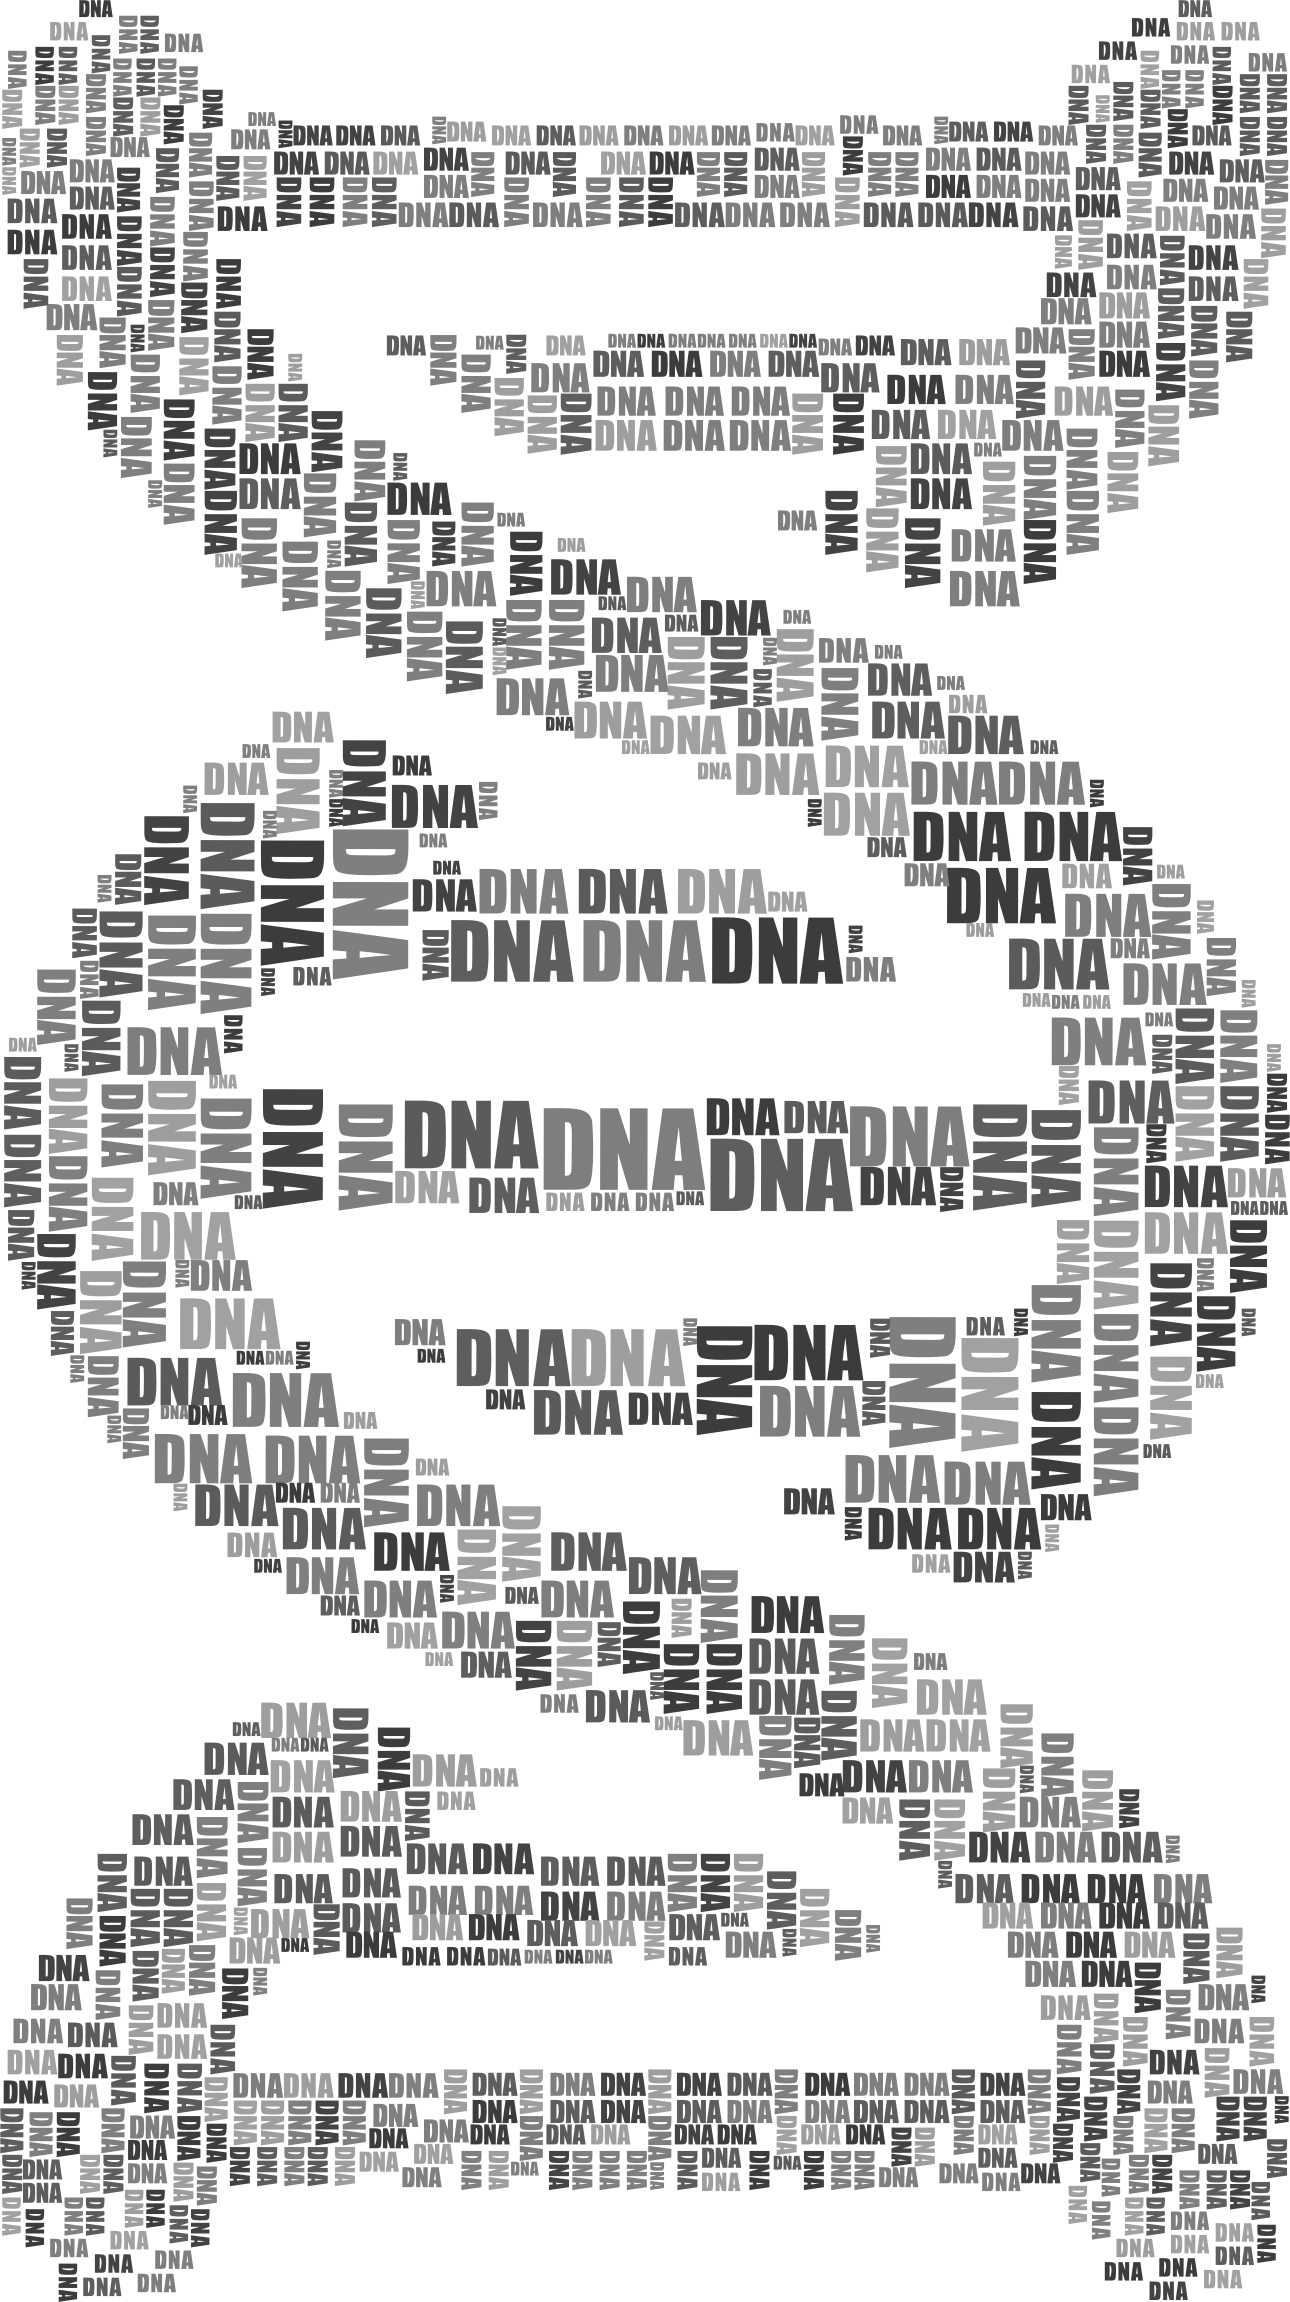 Pattern clipart word. Dna strand cloud typography